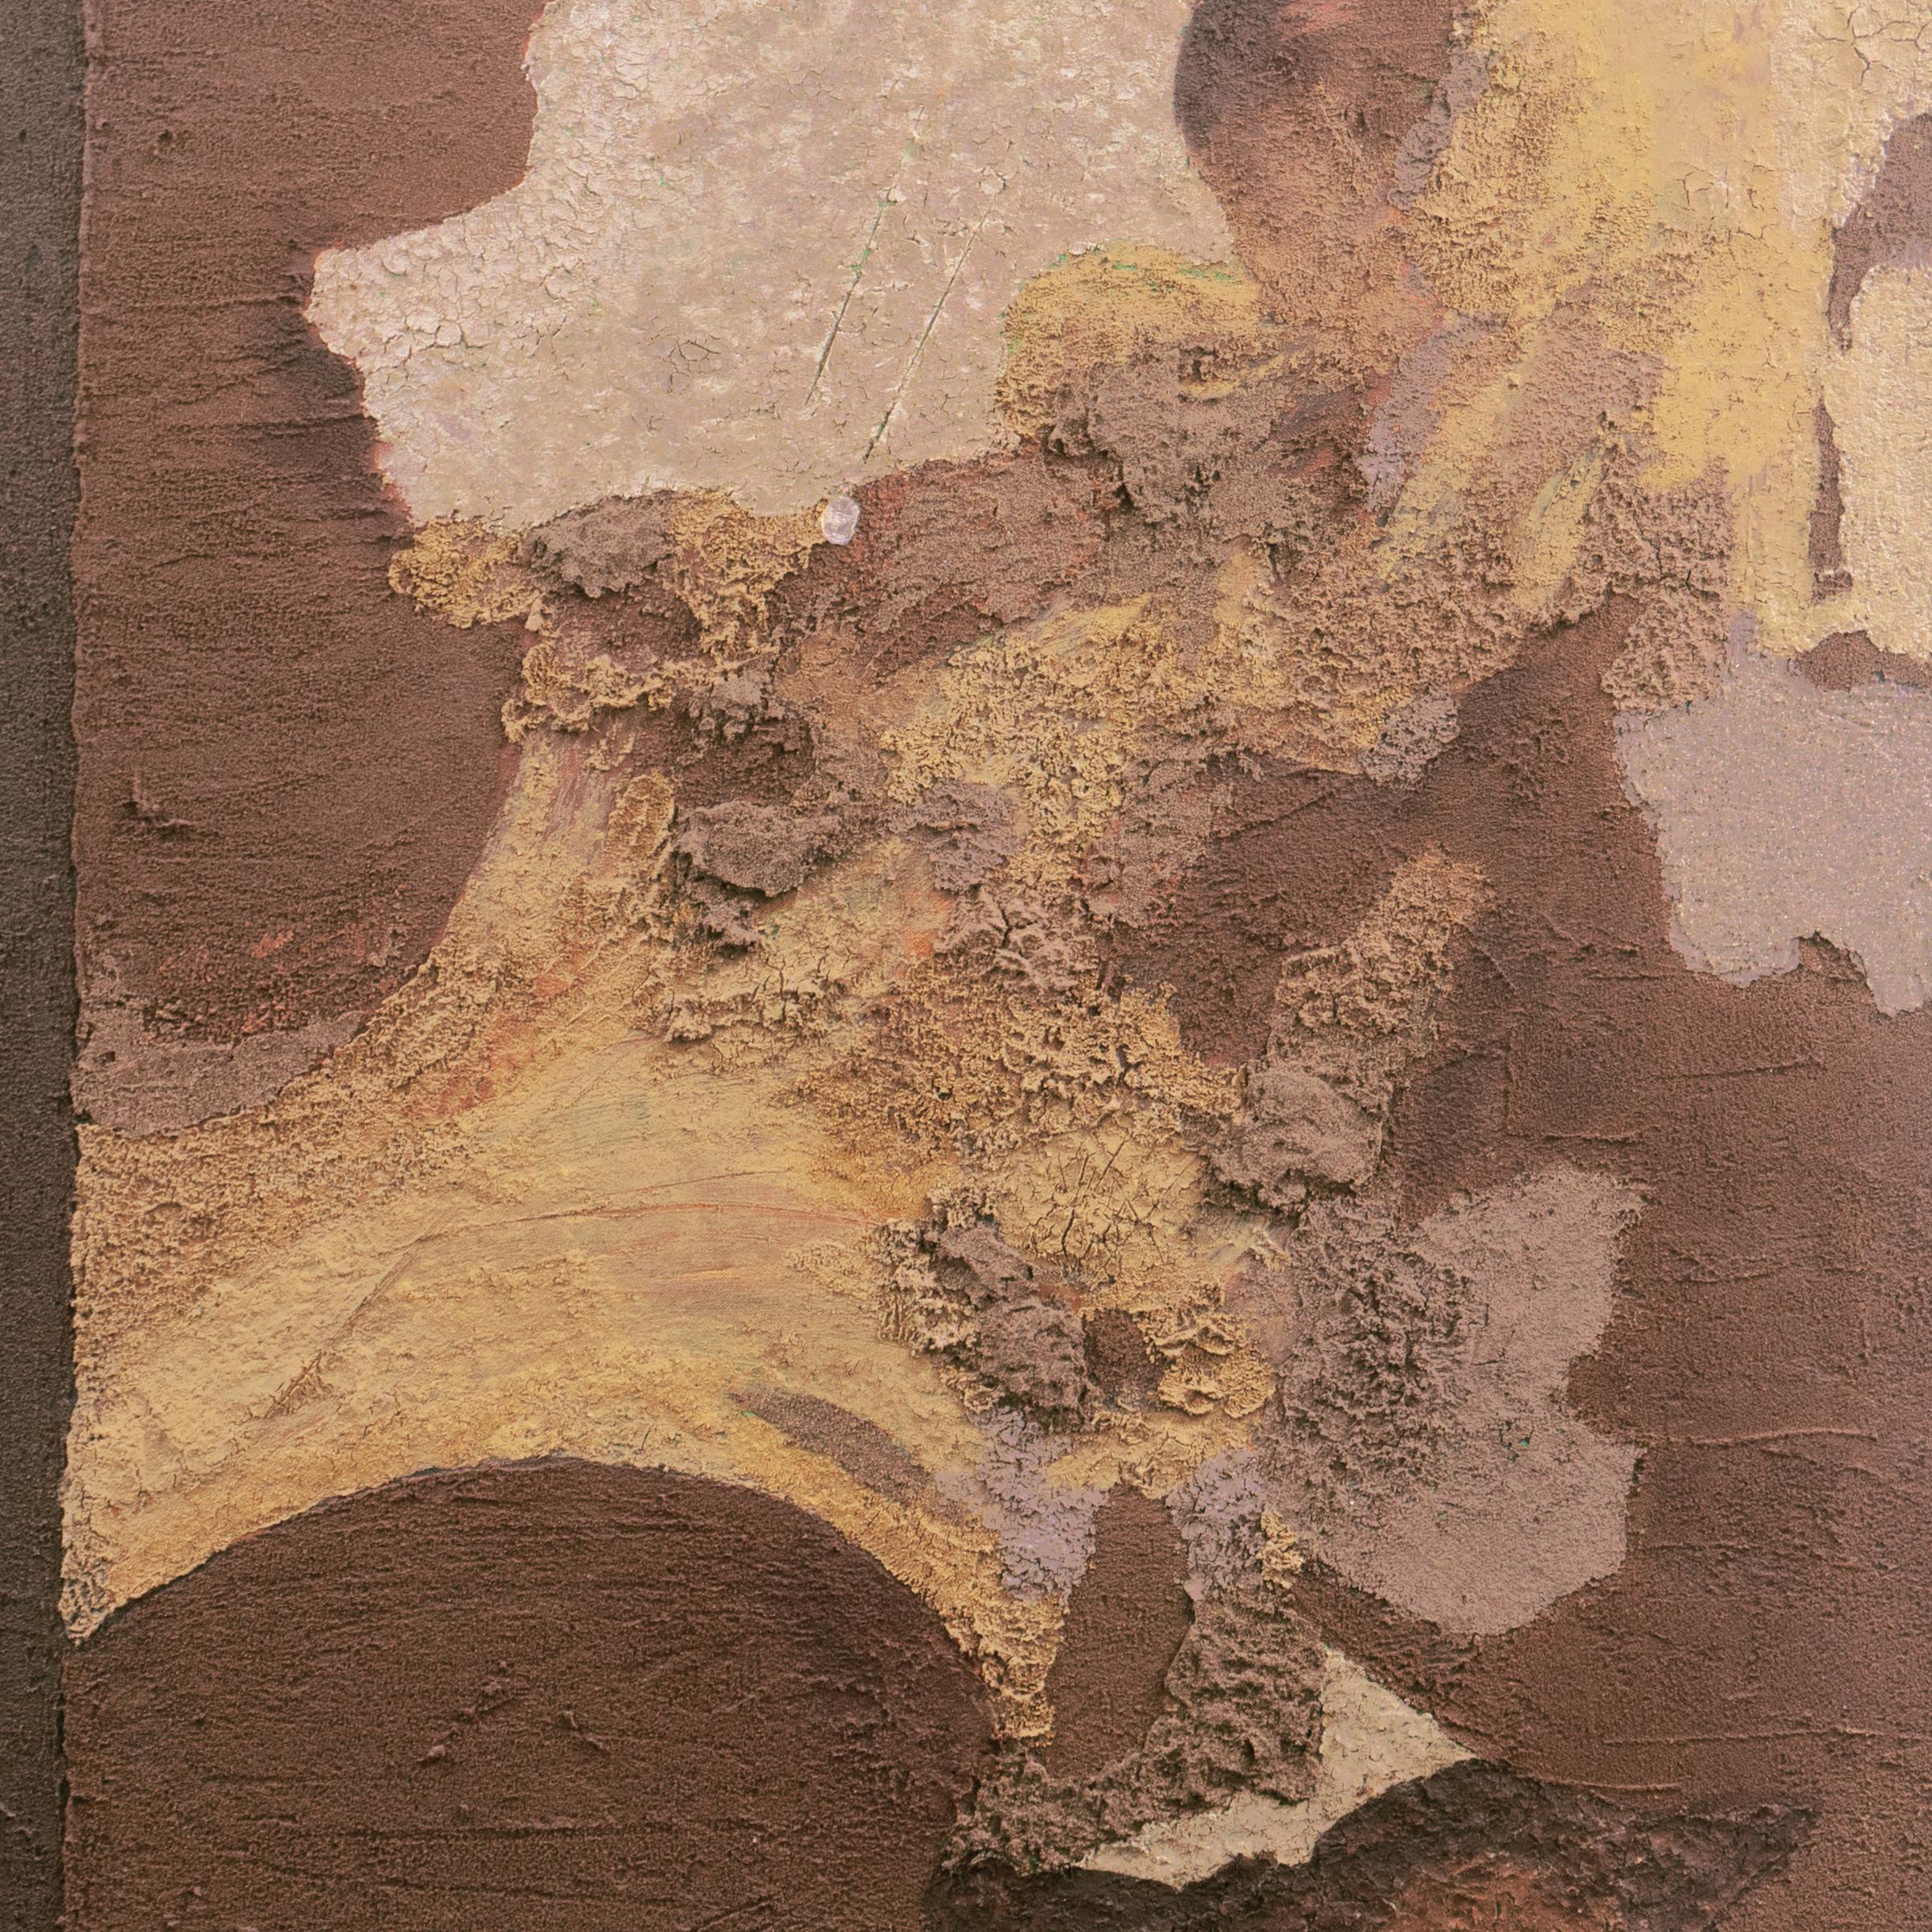 'Abstract in Ochre and Umber', California Woman artist, Palo Alto, San Jose 2